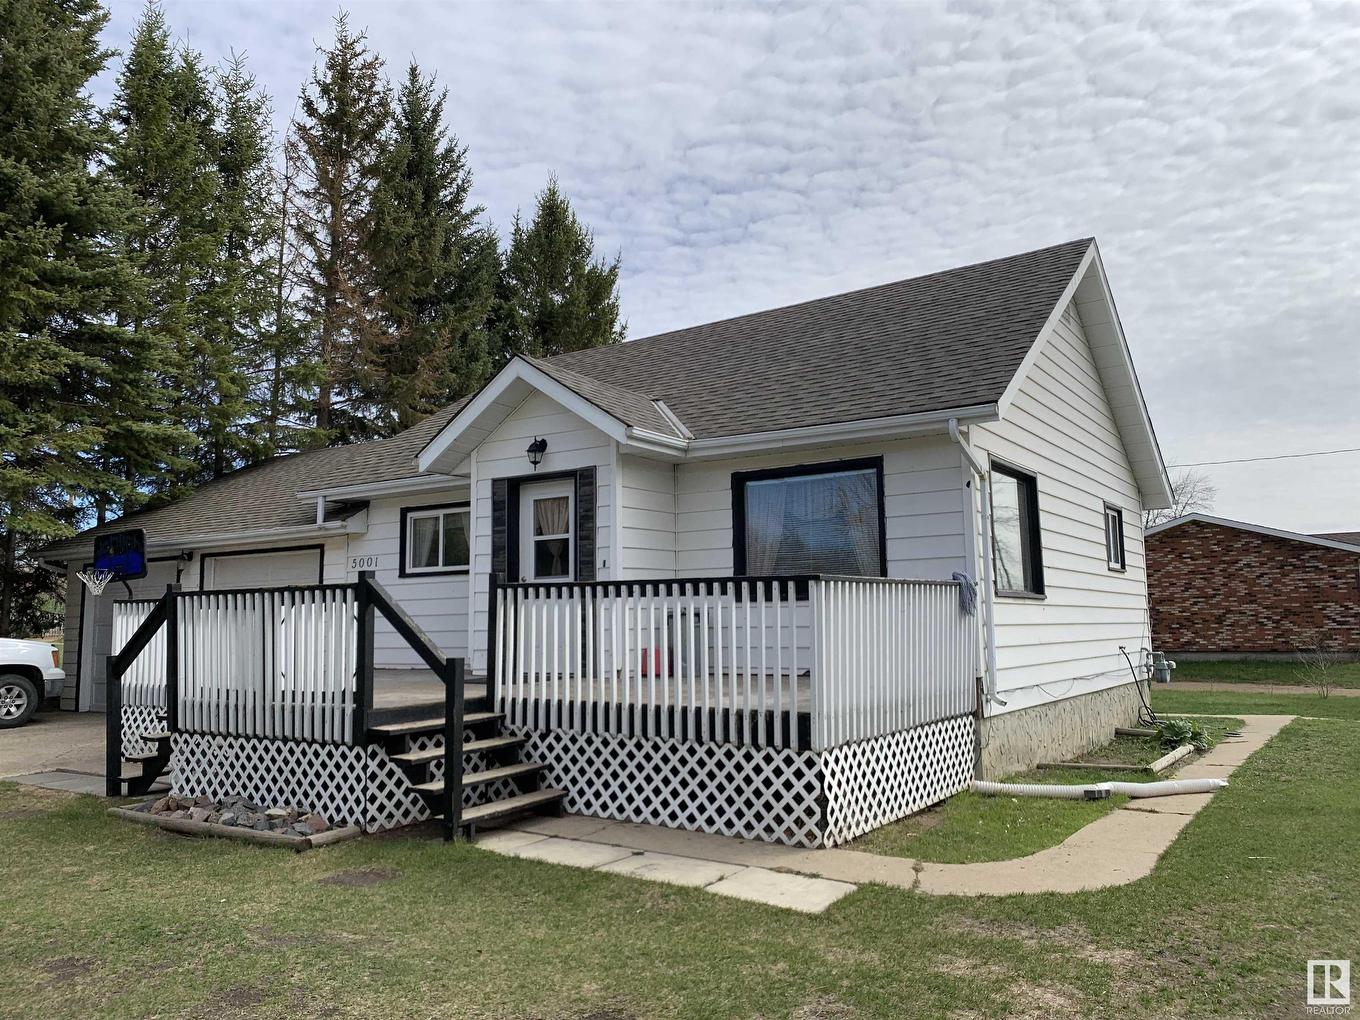 5001 46 St, Two Hills, AB, T0B 4K0 - house for sale | Listing ID 